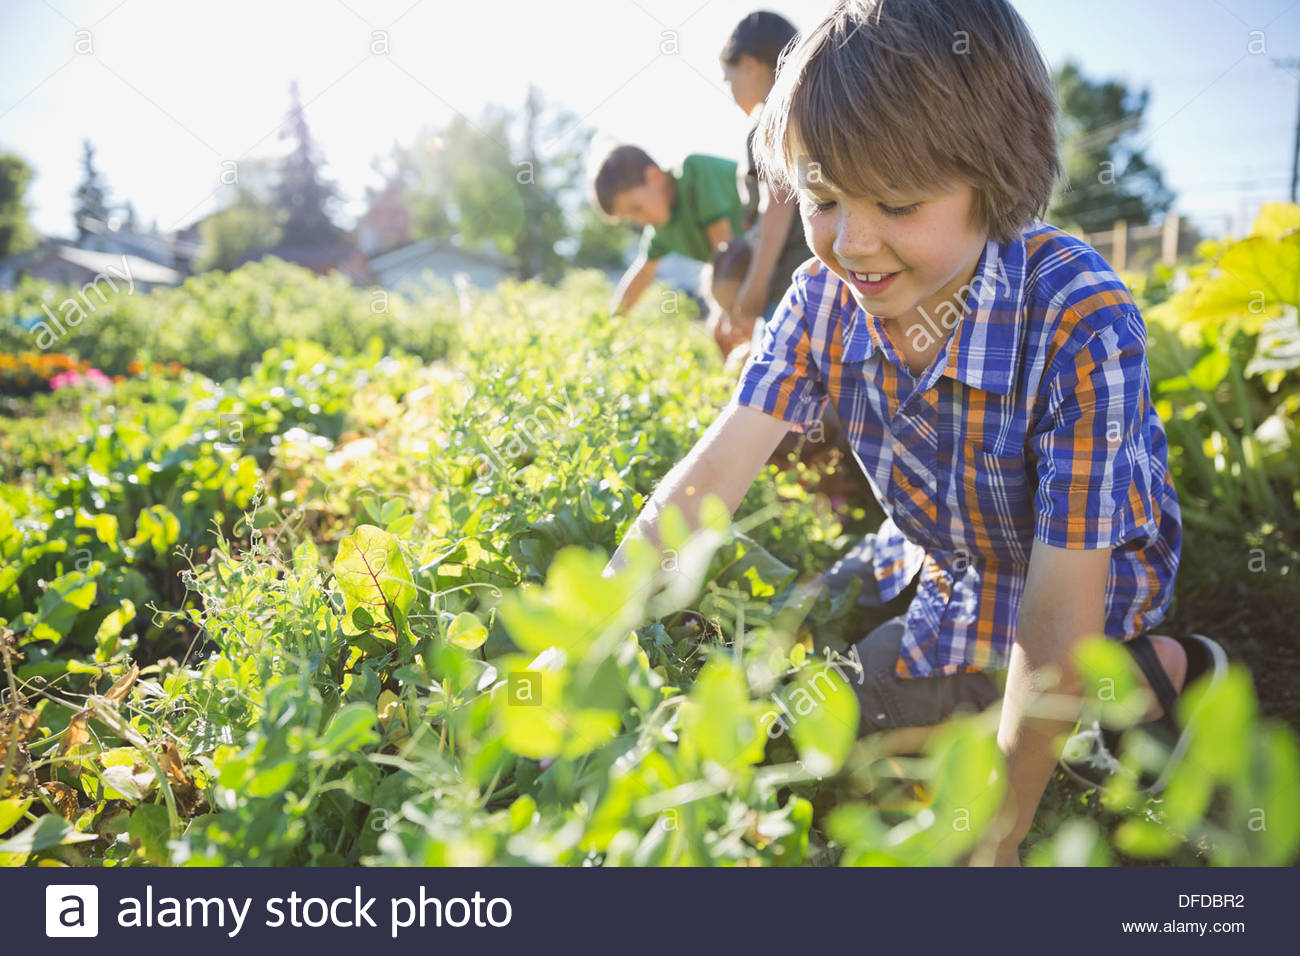 Young kids working together in community garden Stock Photo